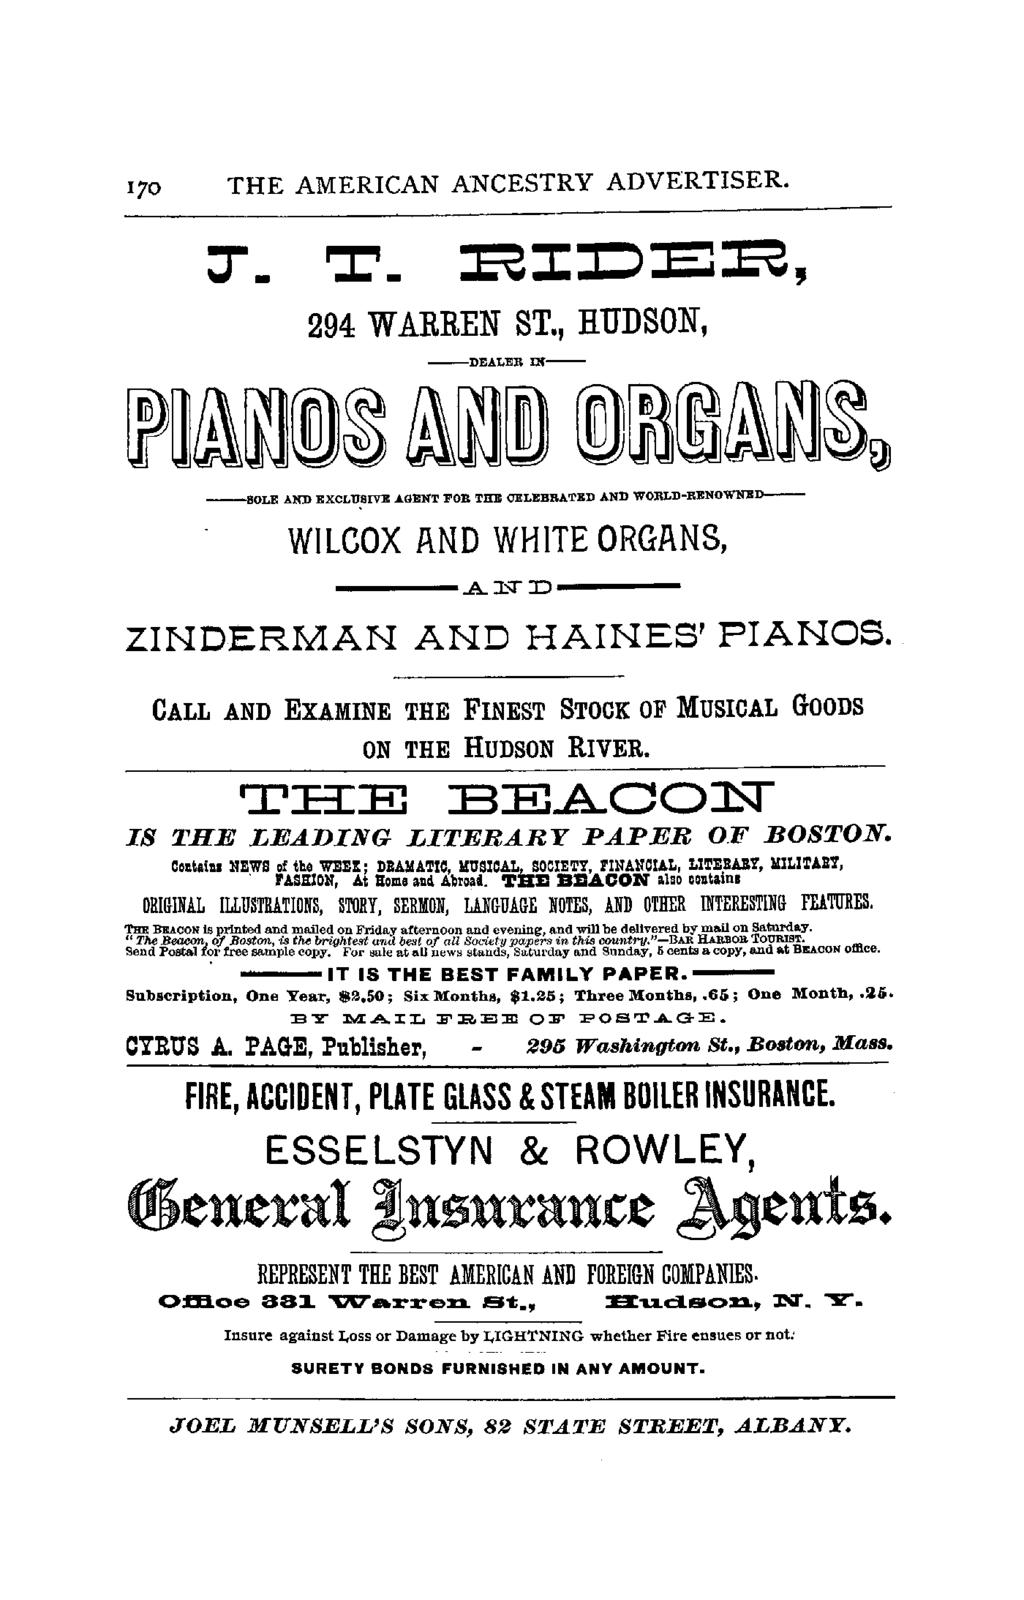 170 THE AMERICAN ANCESTRY ADVERTISER. ::r. ':1:'. 294 WARREN ST., HUDSON, -DEALER IN- -SOLE AND EXCLUSIVE AGENT FOR THE CELEBRATED AND WOBLD-RENOWNBD- WILCOX AND WHITE ORGANS, ----.A J,.